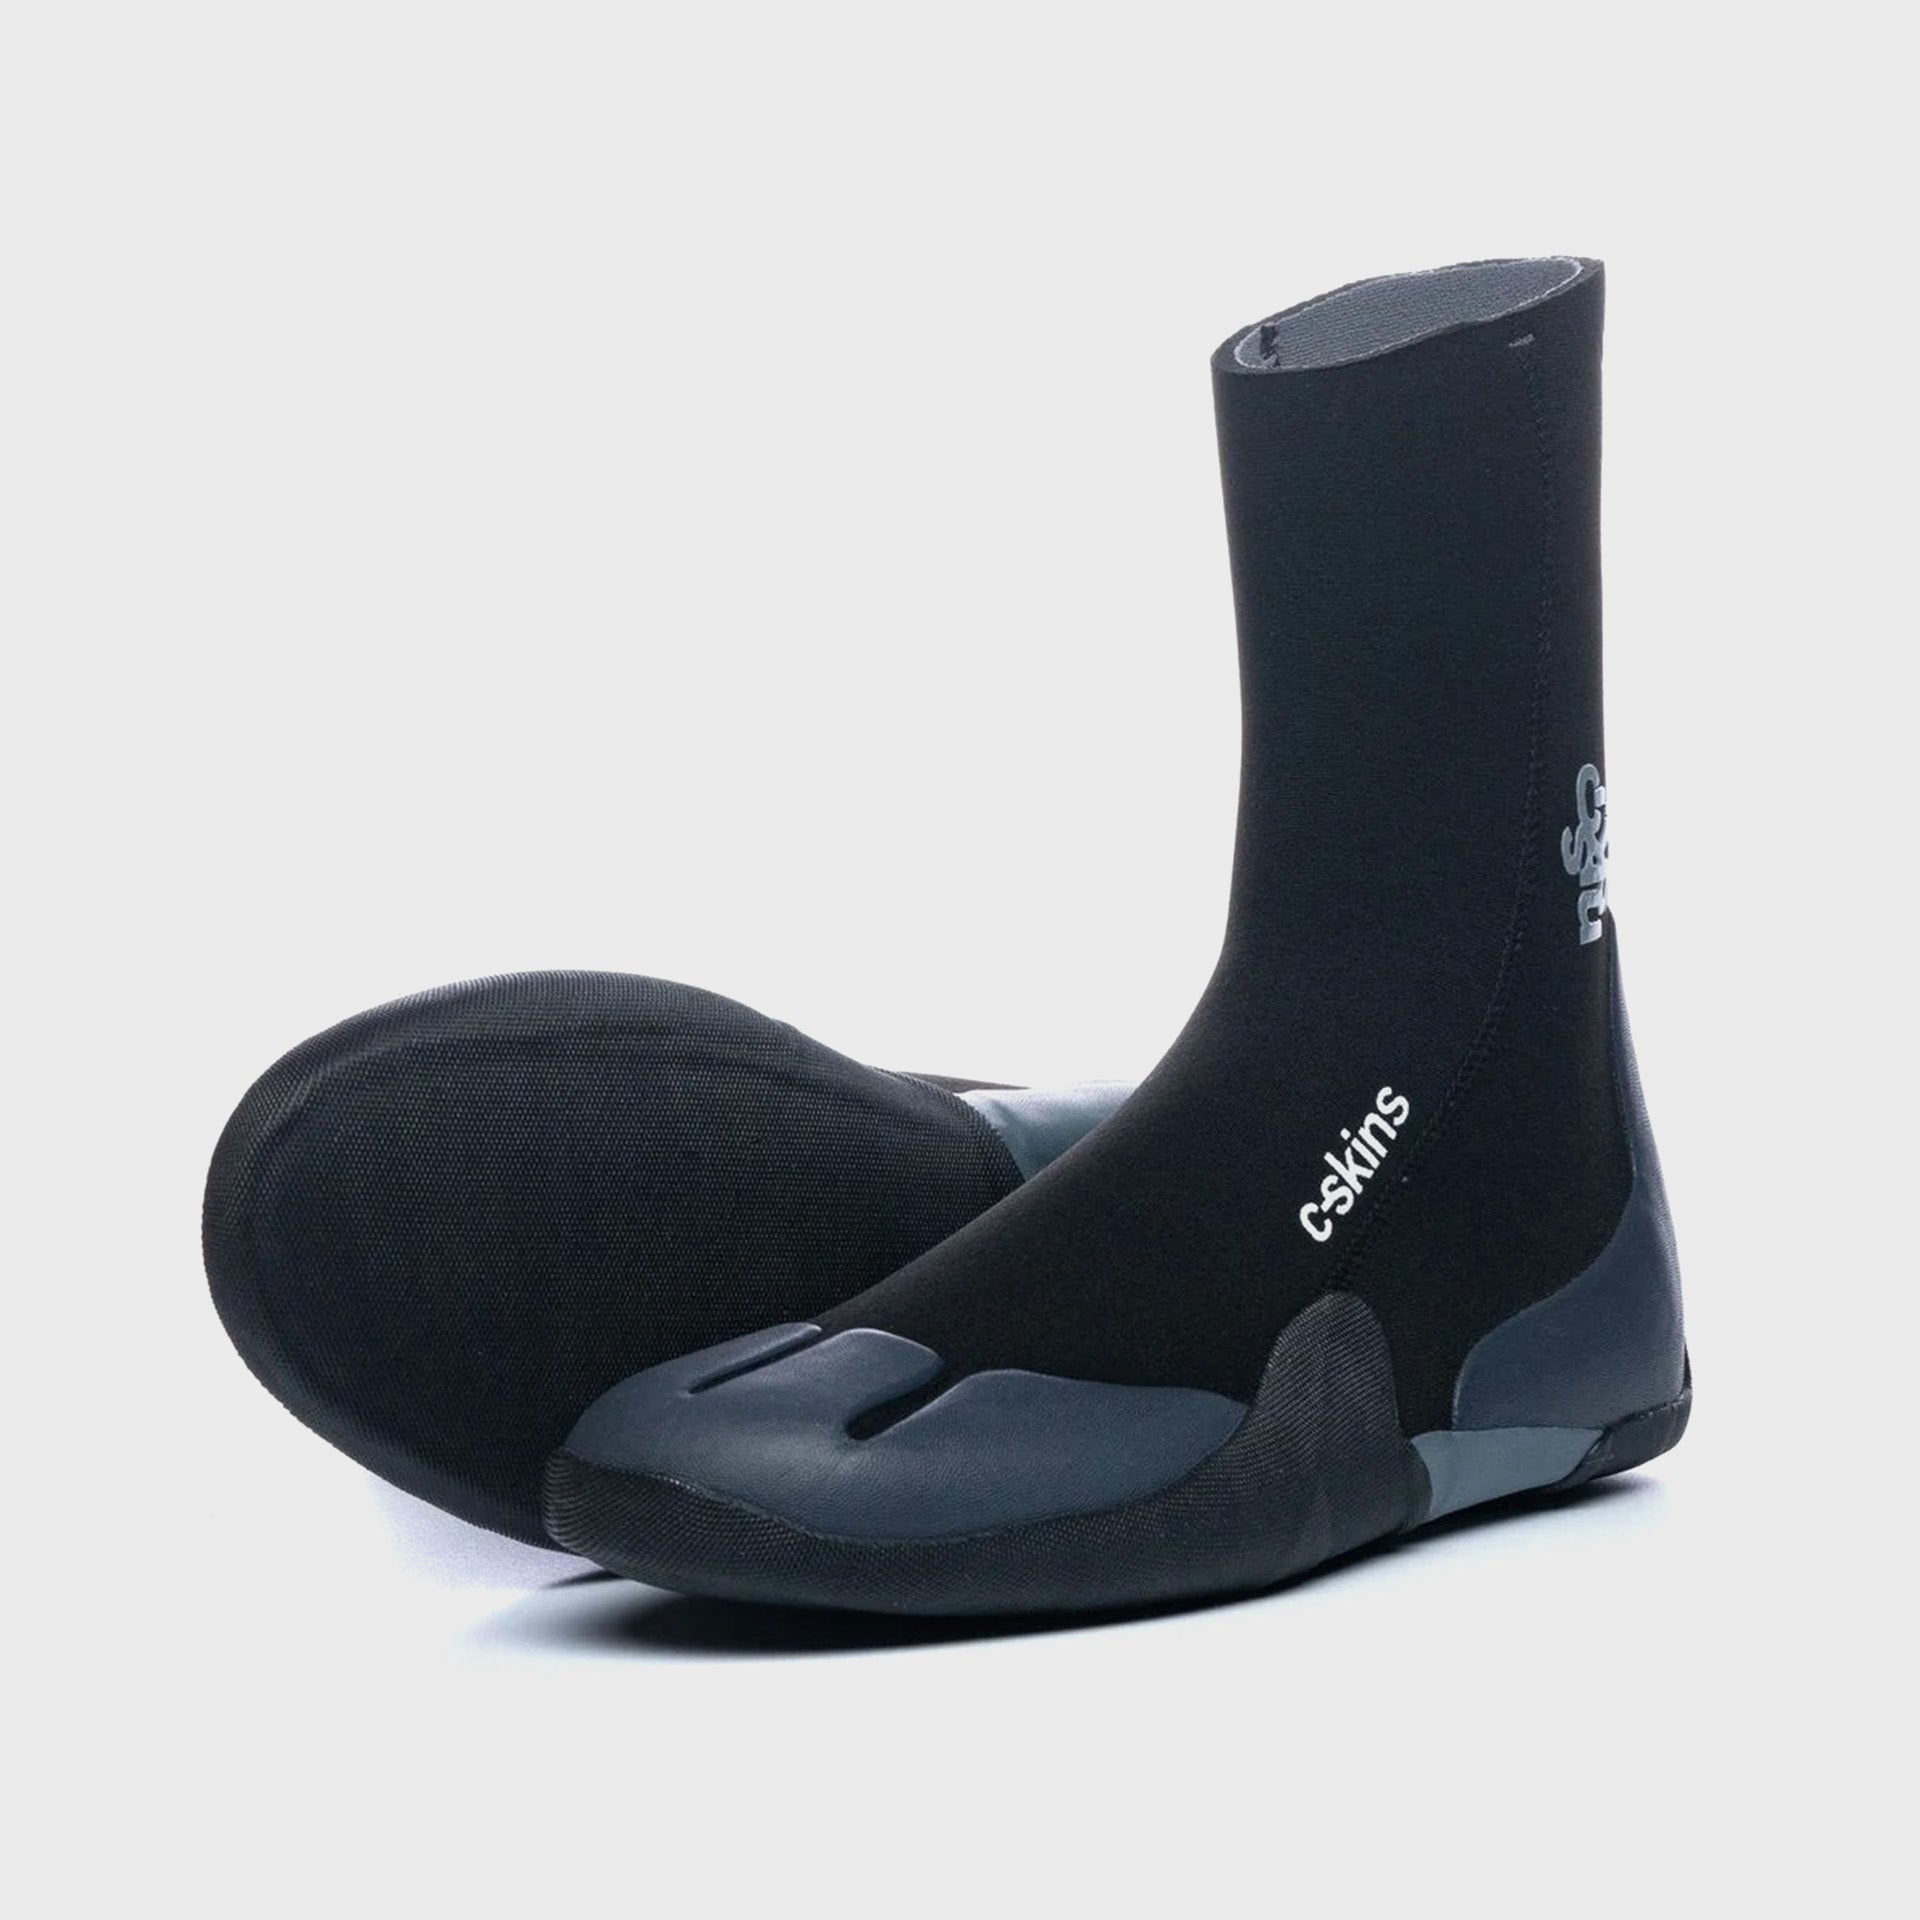 C-Skins Legend Round Toe 5mm Wetsuit Boots - Black Charcoal - ManGo Surfing